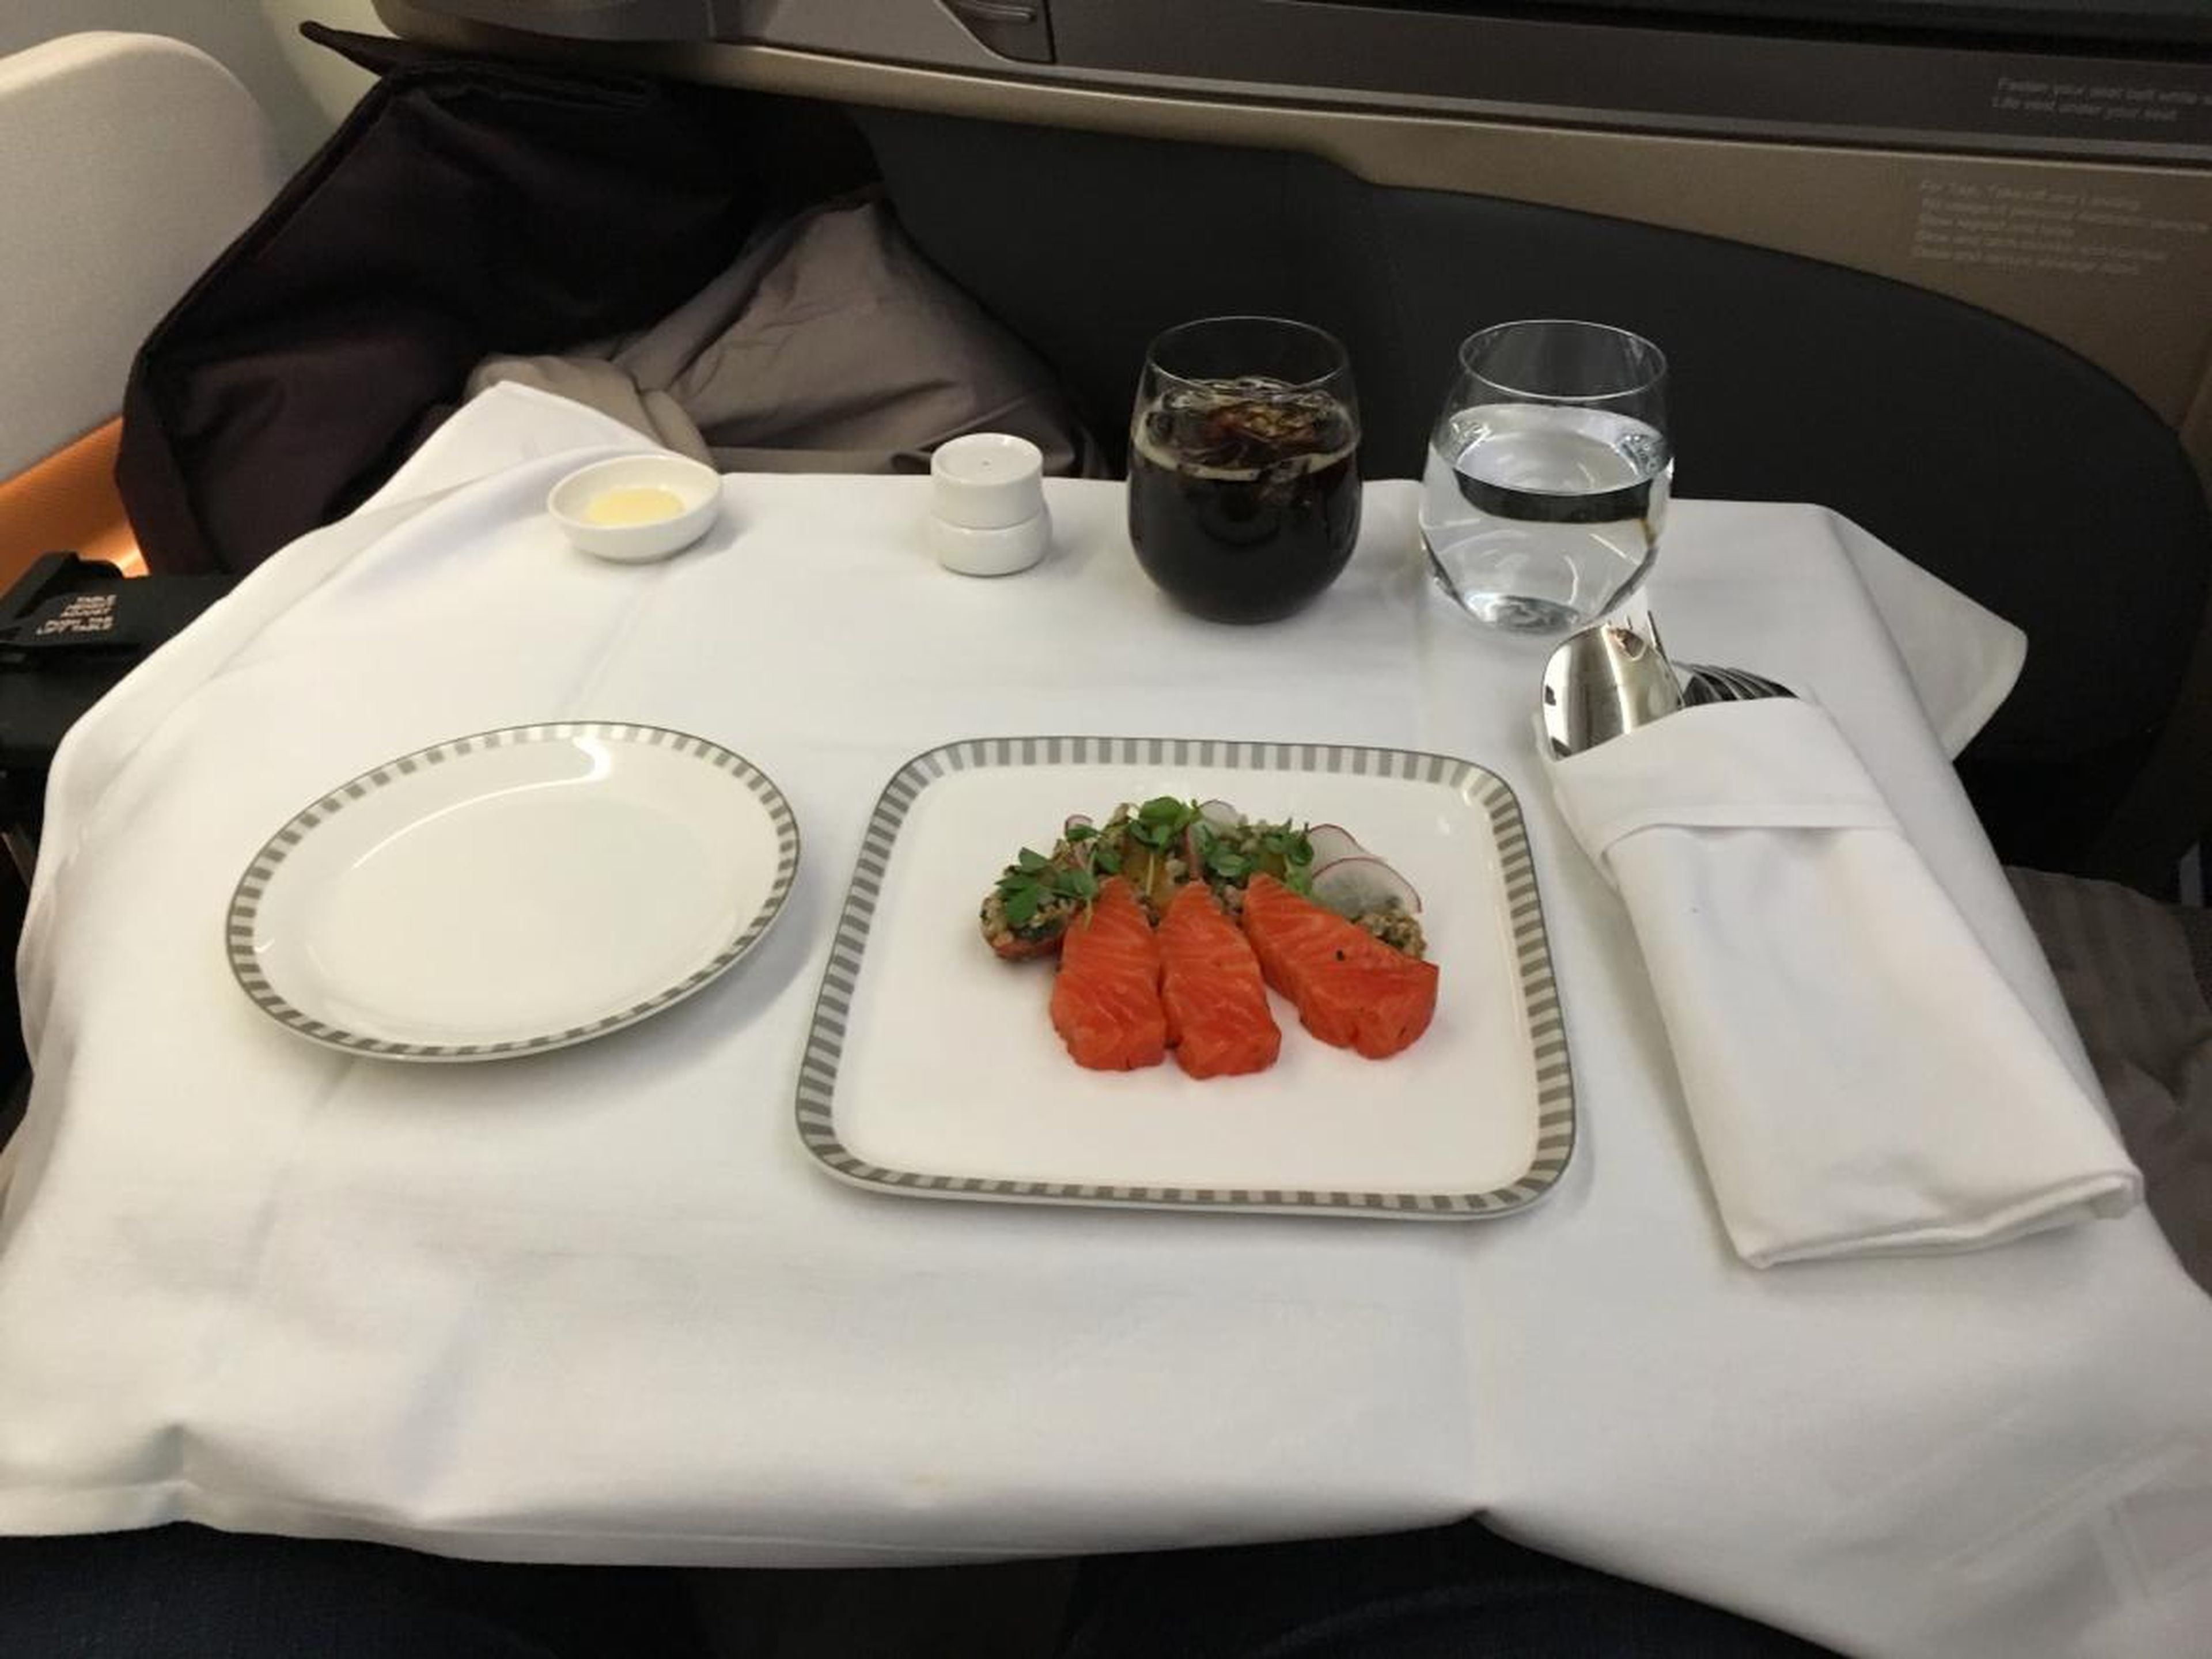 Food and beverage service in business class was rather impressive.